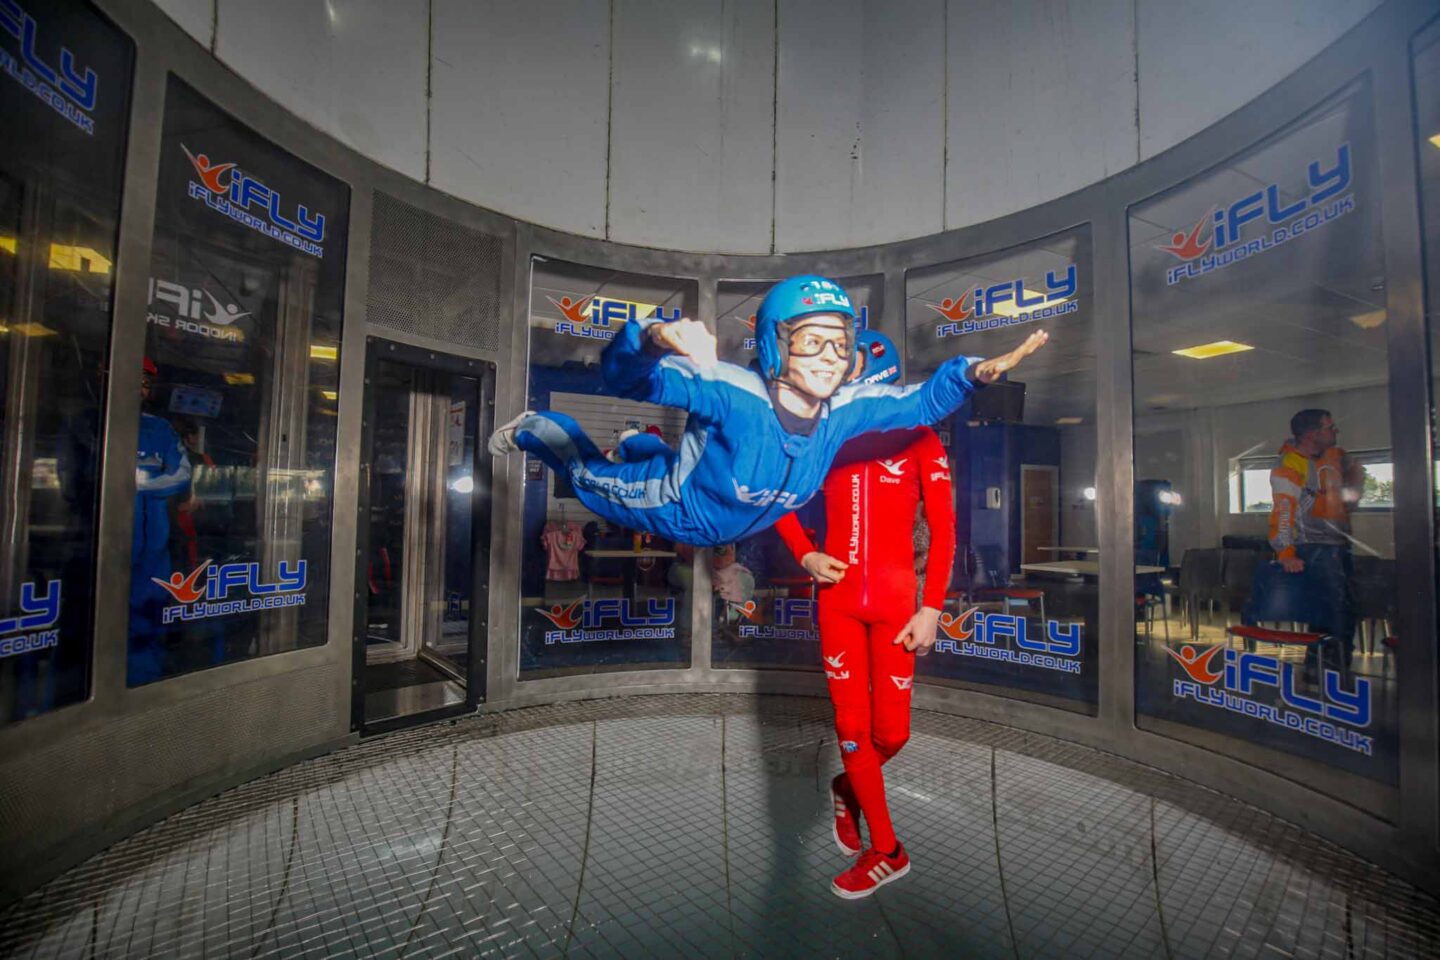 ifly Manchester, Skydive Manchester, overexposed photos